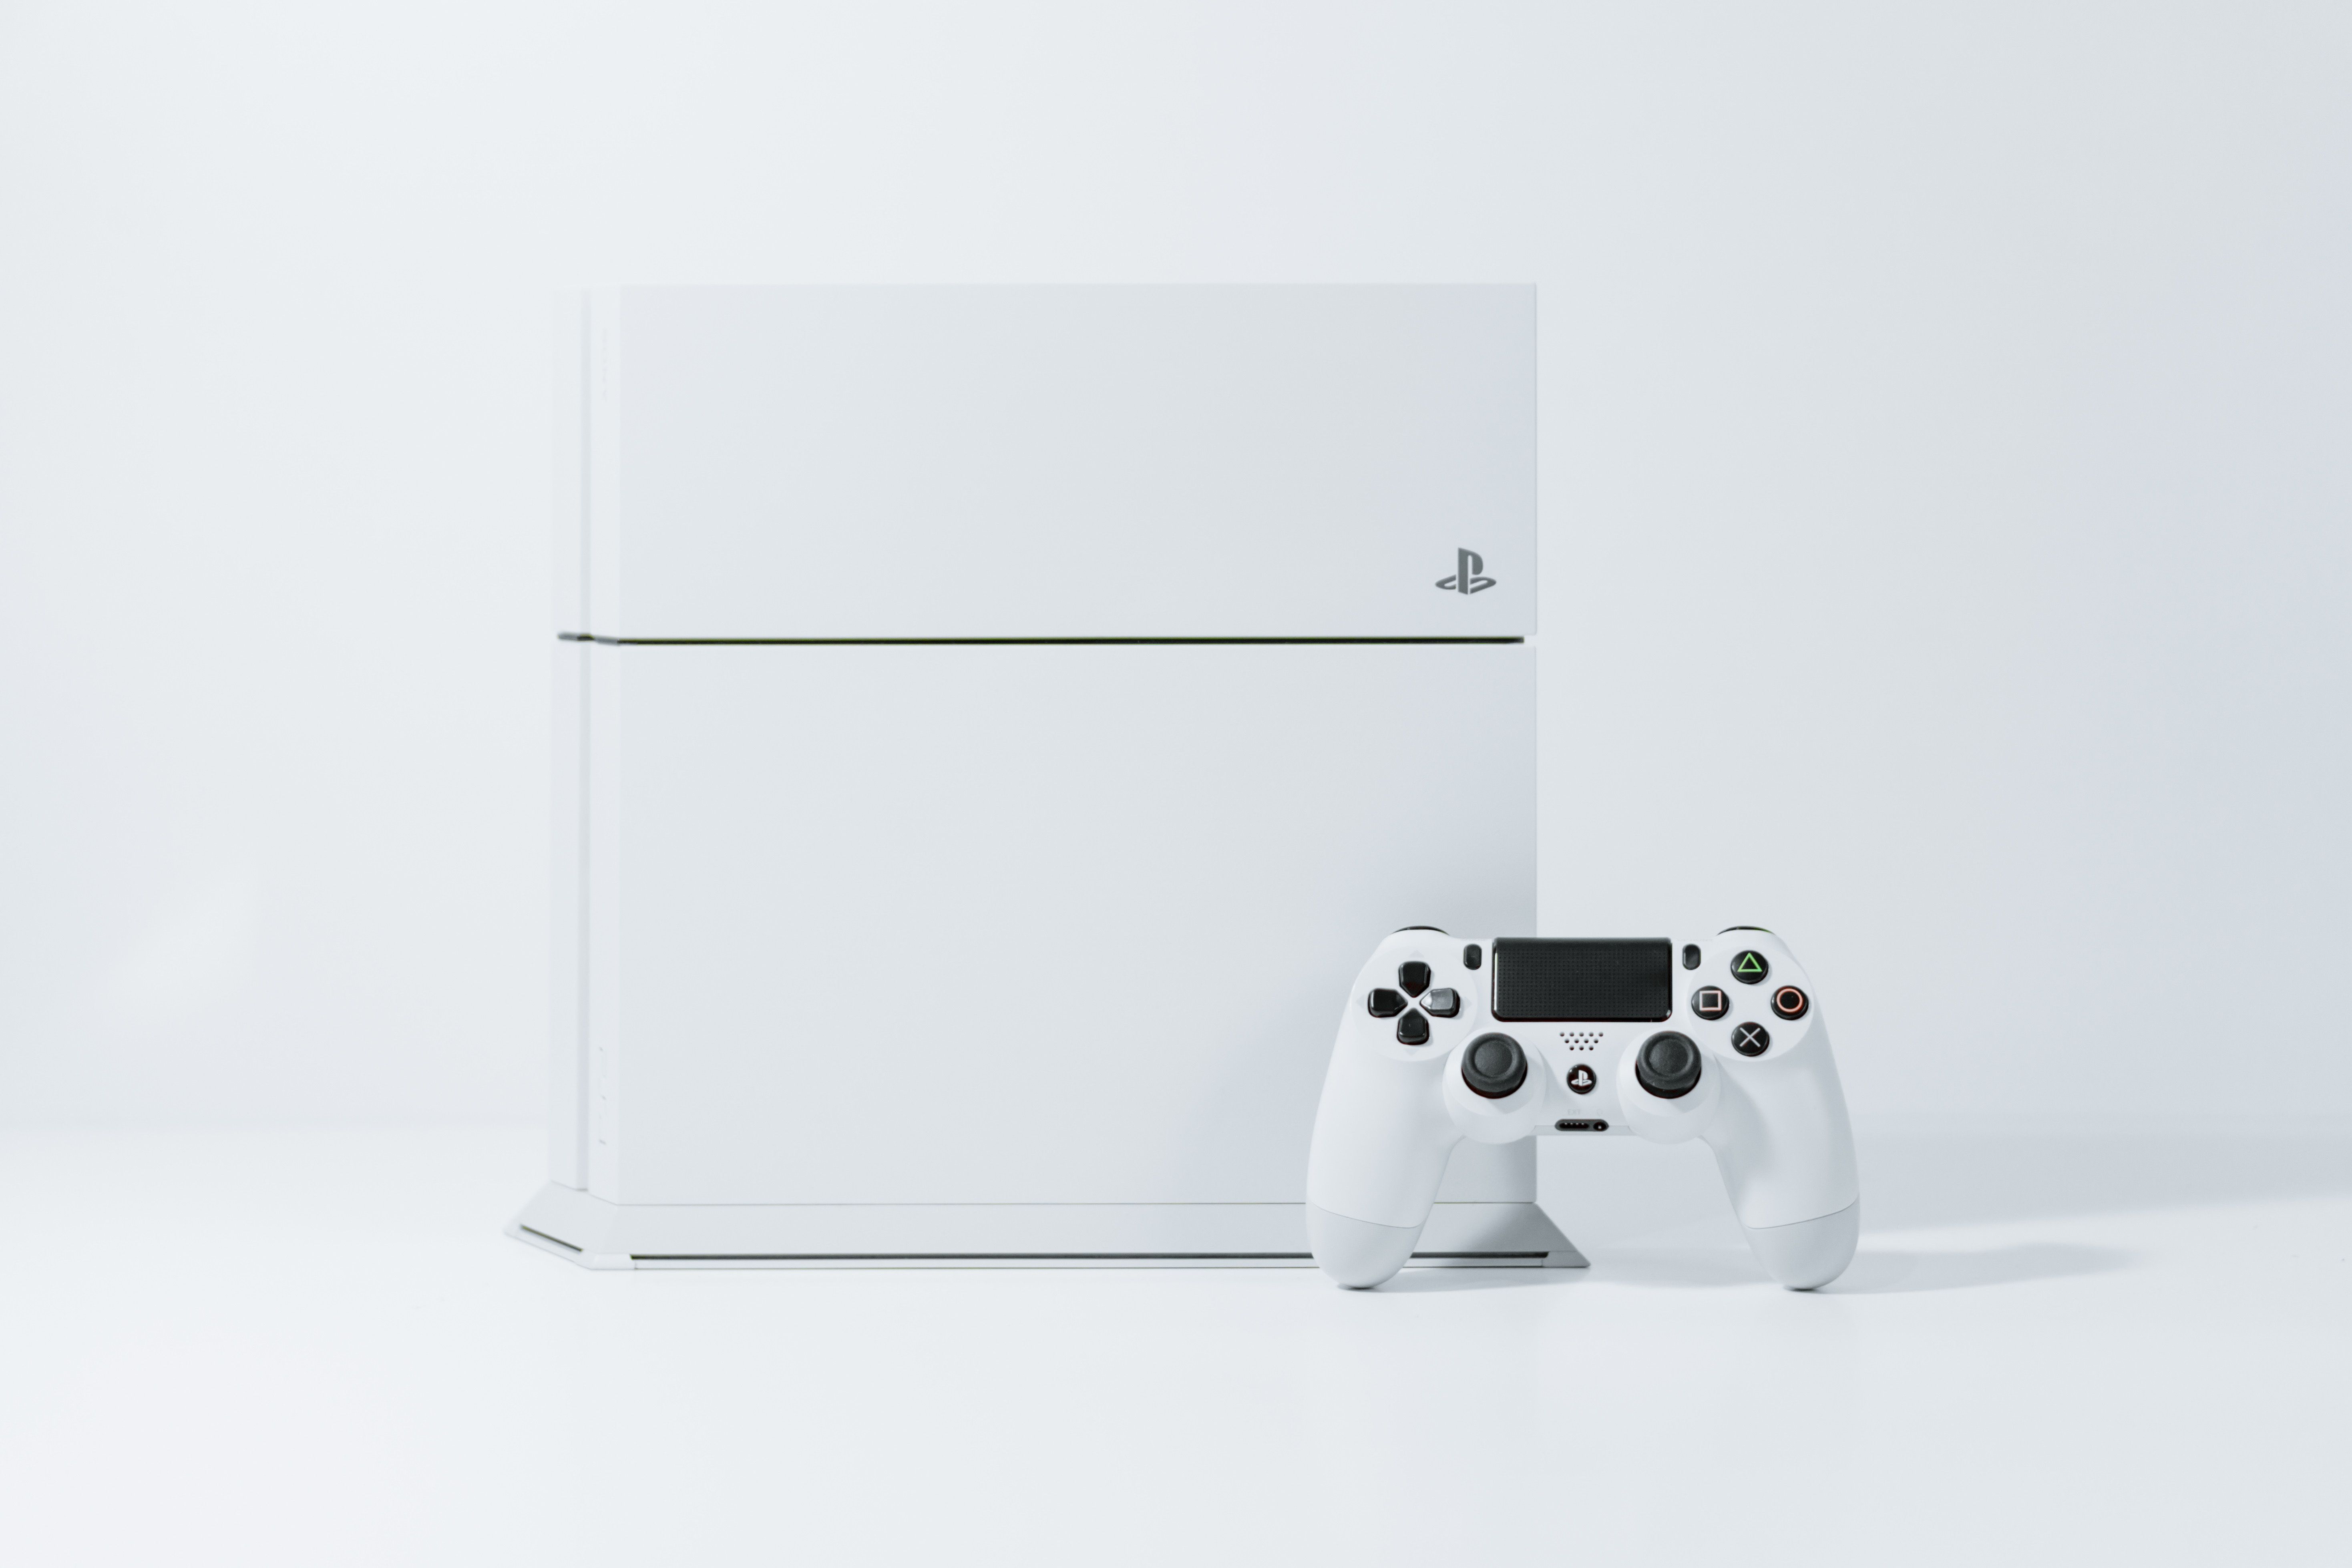 5874x3916 #console, #white, #shadow, #video game, #ps #brand, #gaming, #minimilism, #sony, #thing, #black, #controller, #technology, #simplicity, #minimal, #tech, #Free image, #product, #playstation 4. Mocah.org HD Wallpaper